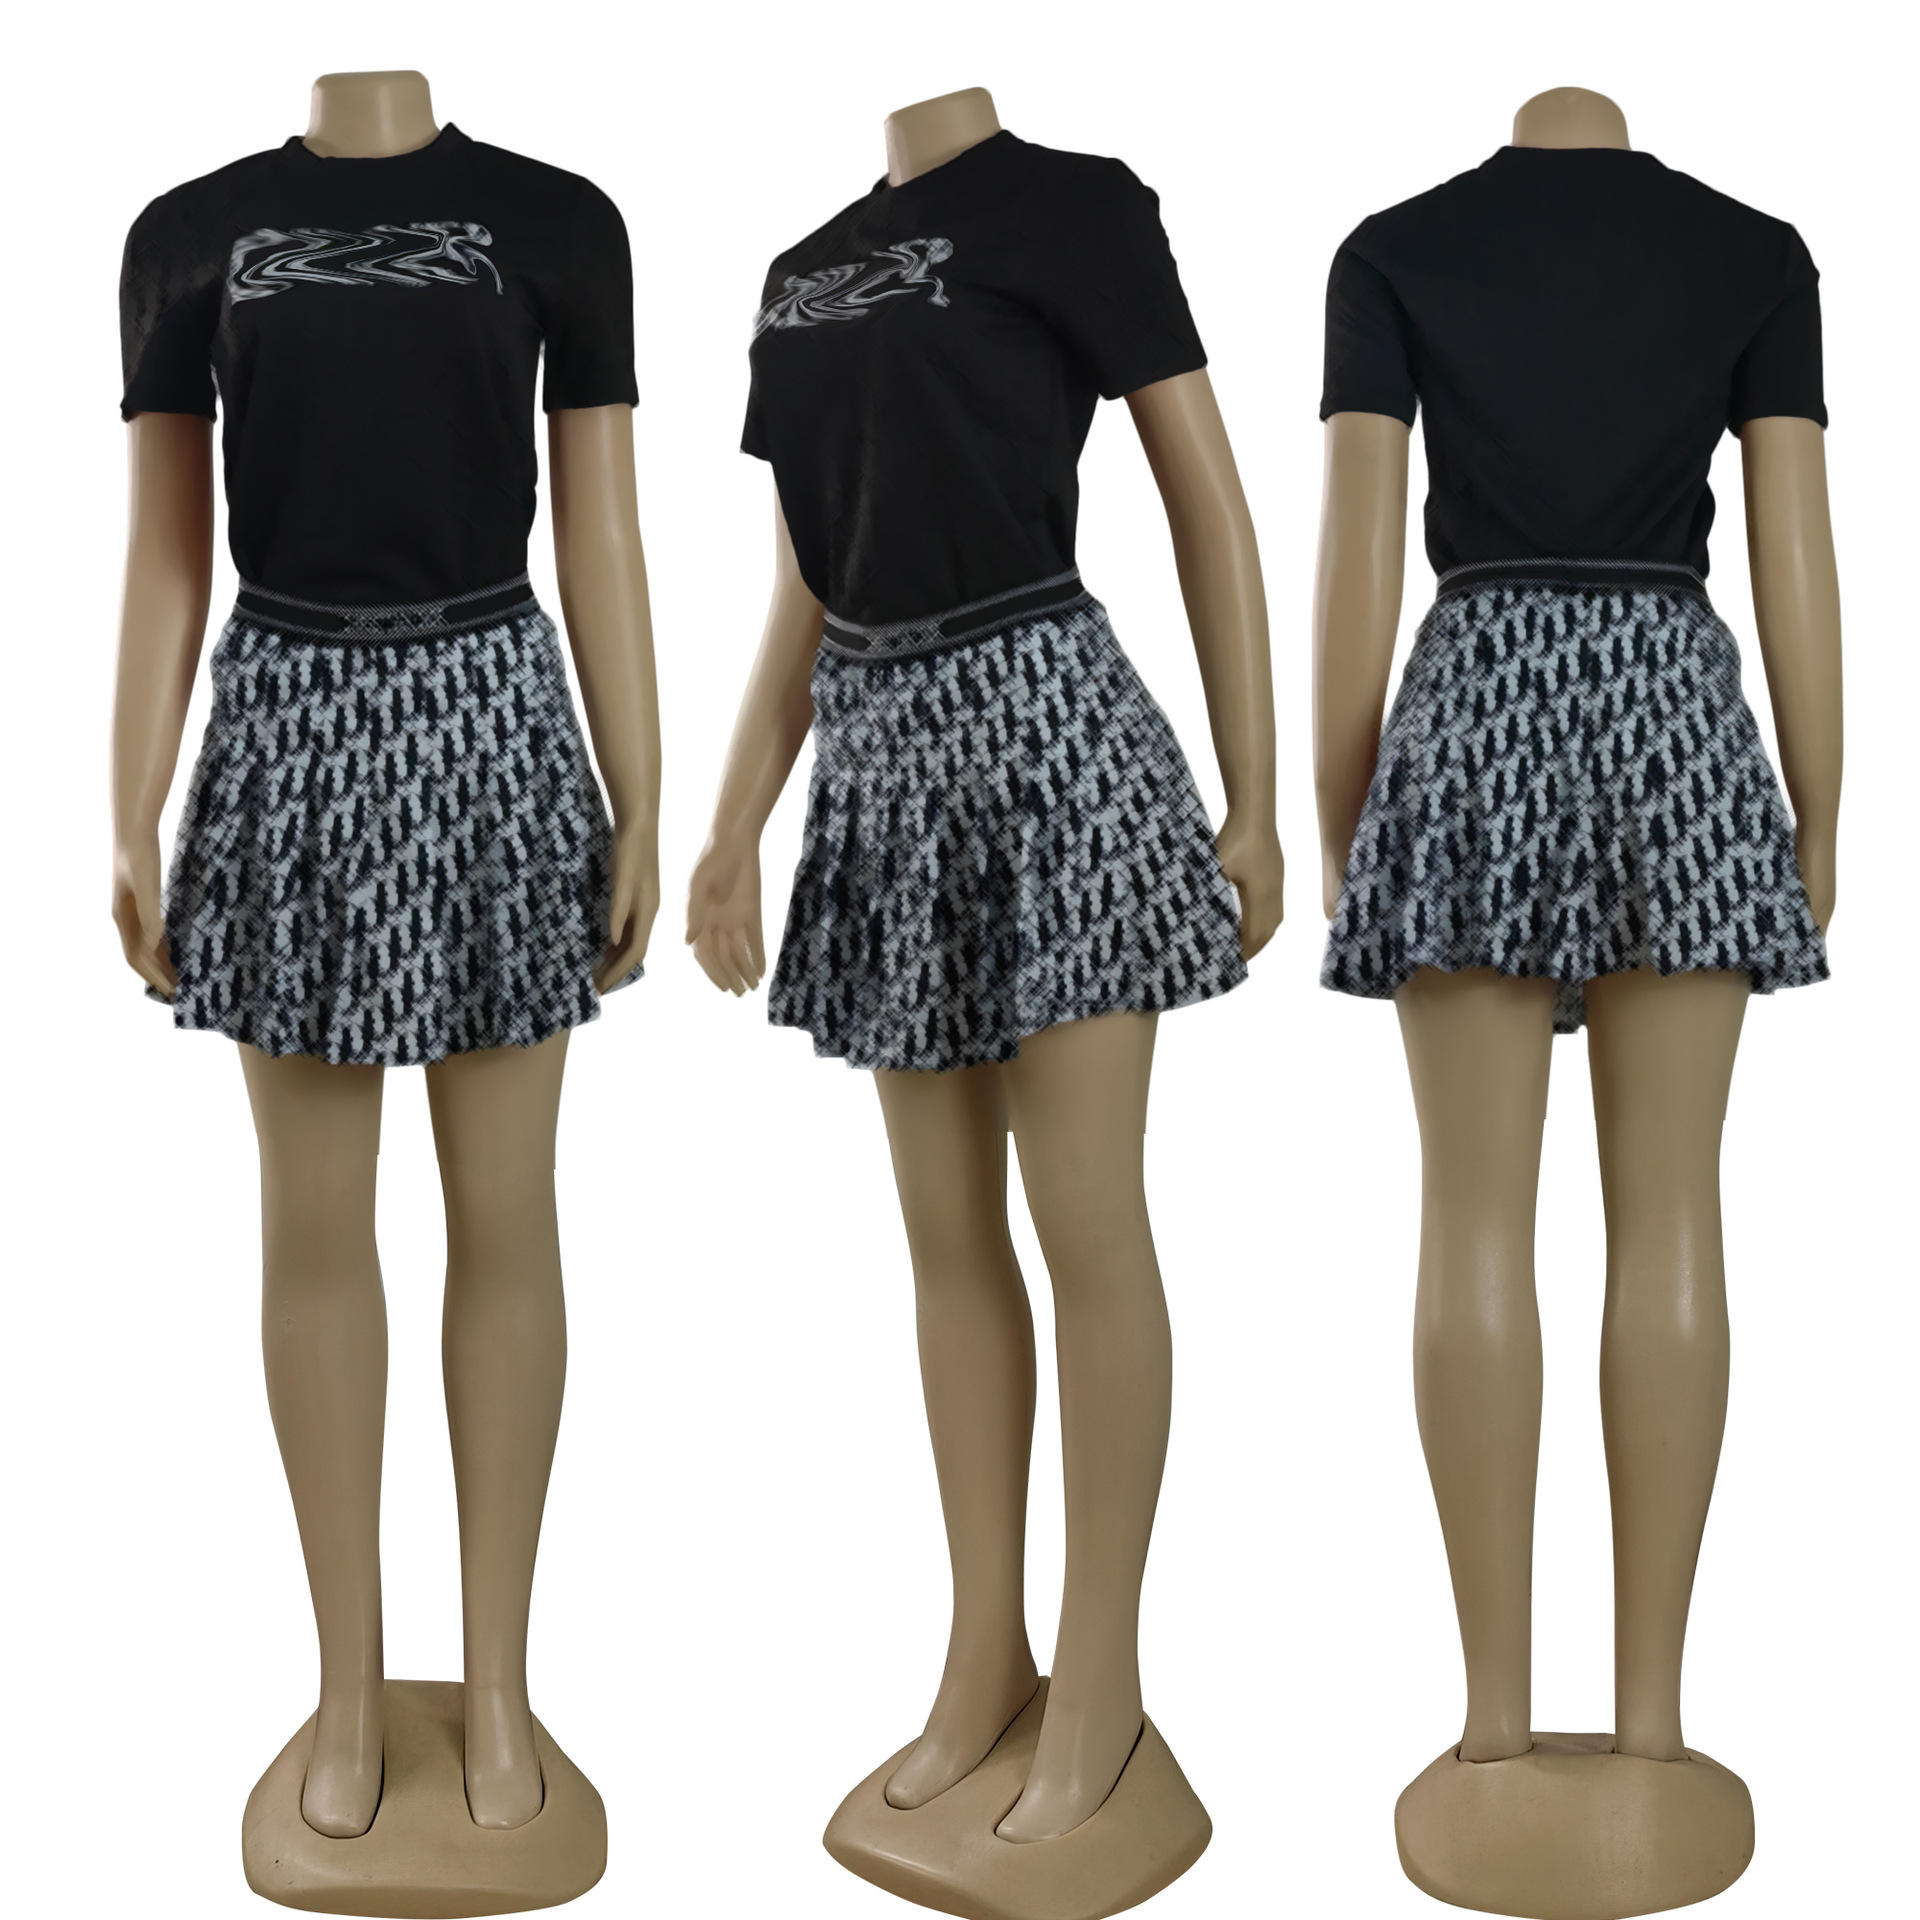 Two Piece Dress Outfits Women Casual Short Sleeve T-shirt and Mini Skirt Sets Free Ship